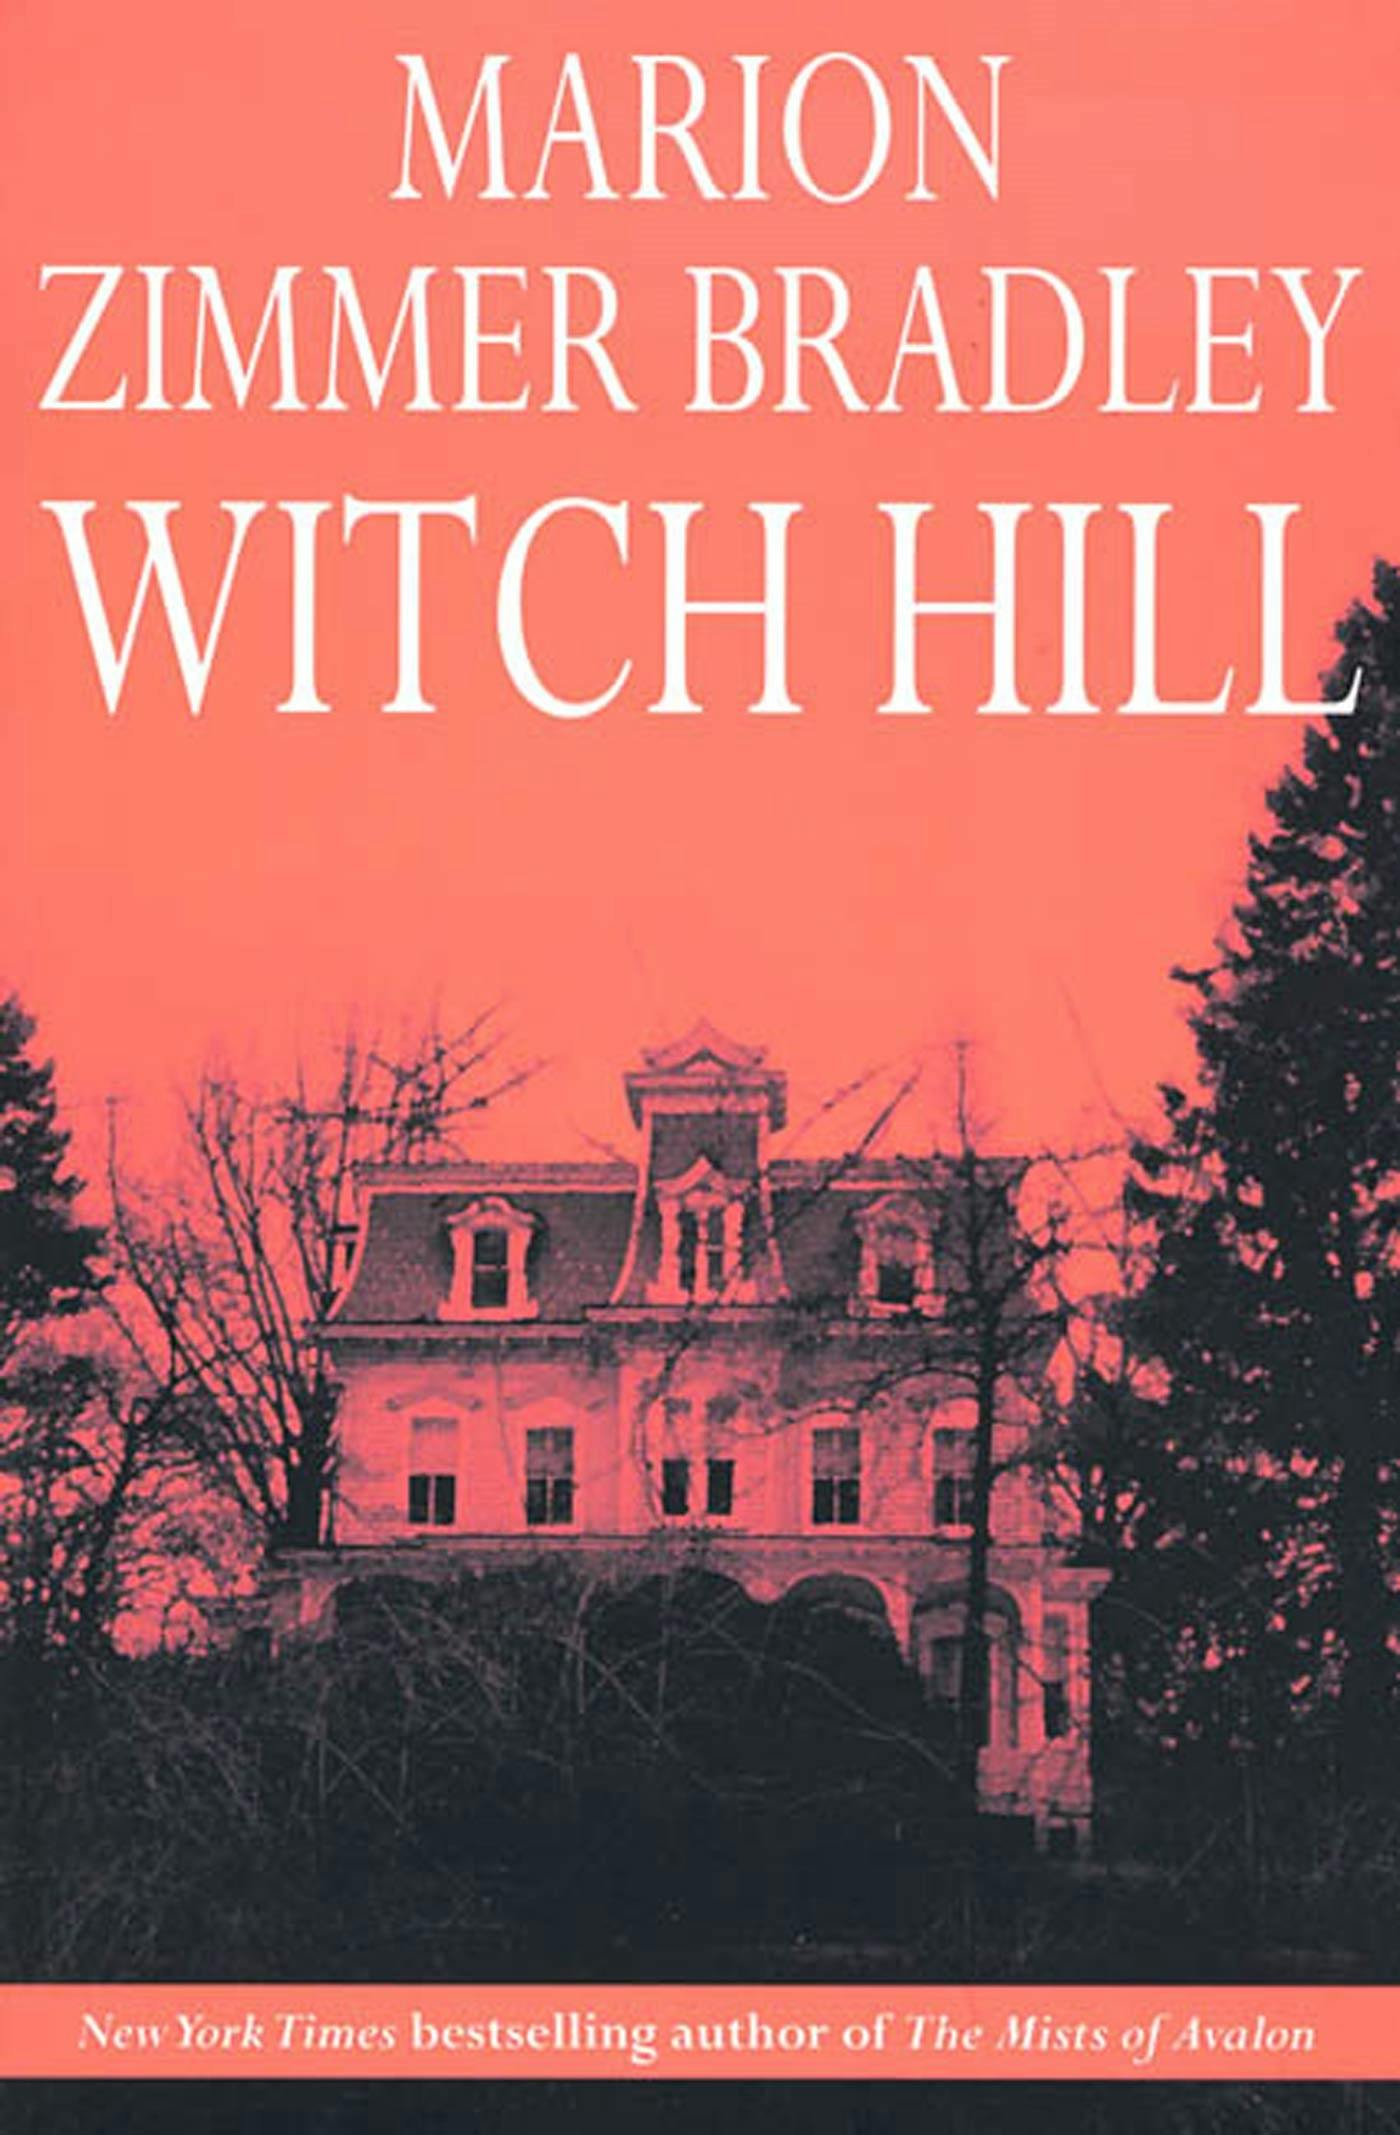 Cover for the book titled as: Witch Hill